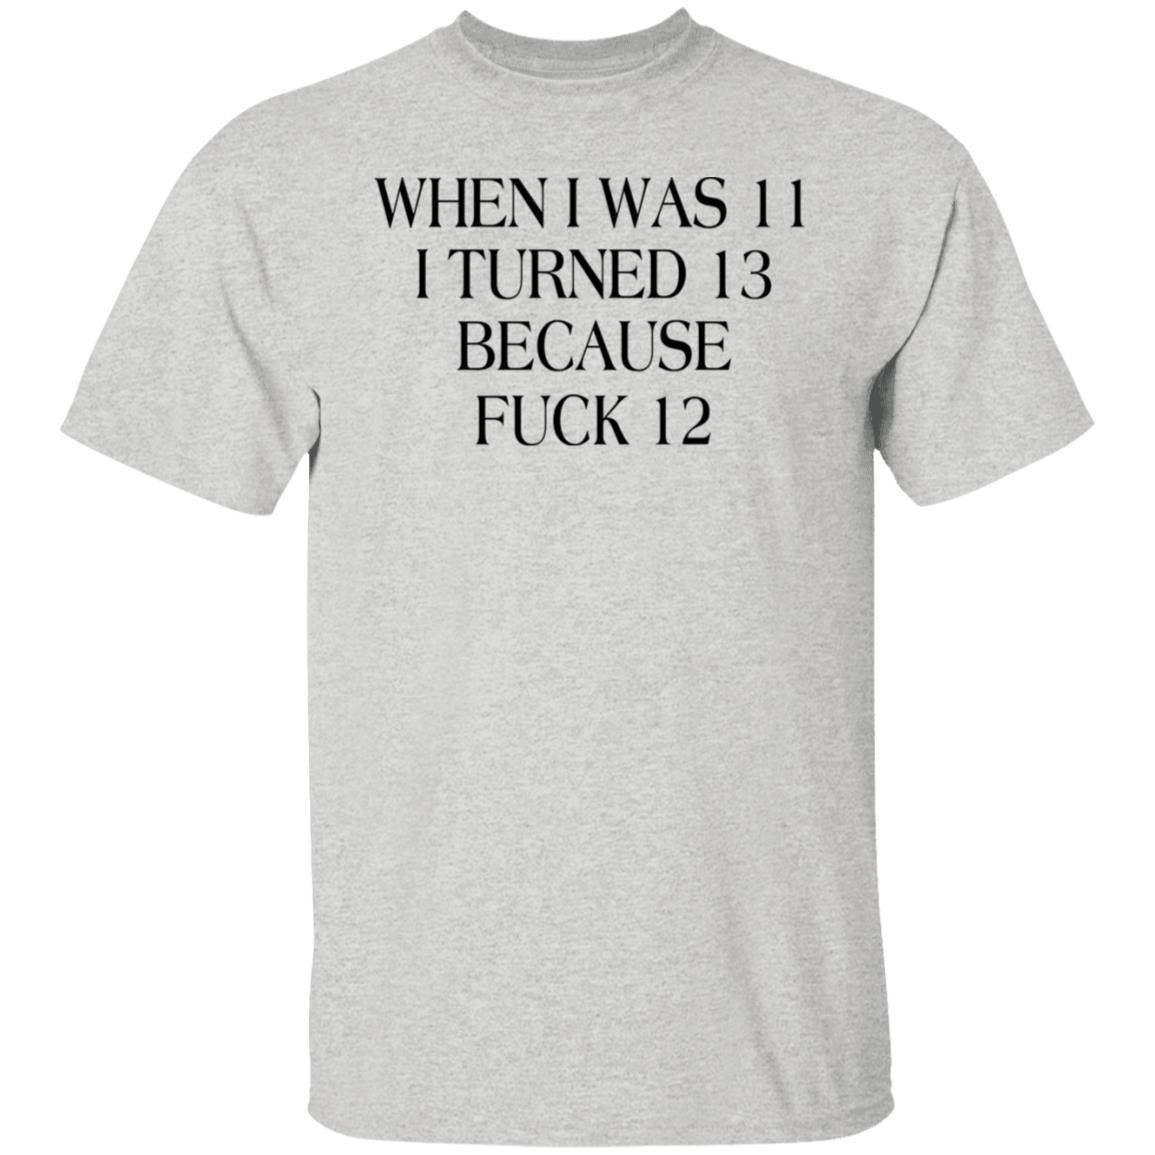 When I Was 11 I Turned 13 Because Fuck 12 Shirt | Allbluetees.com